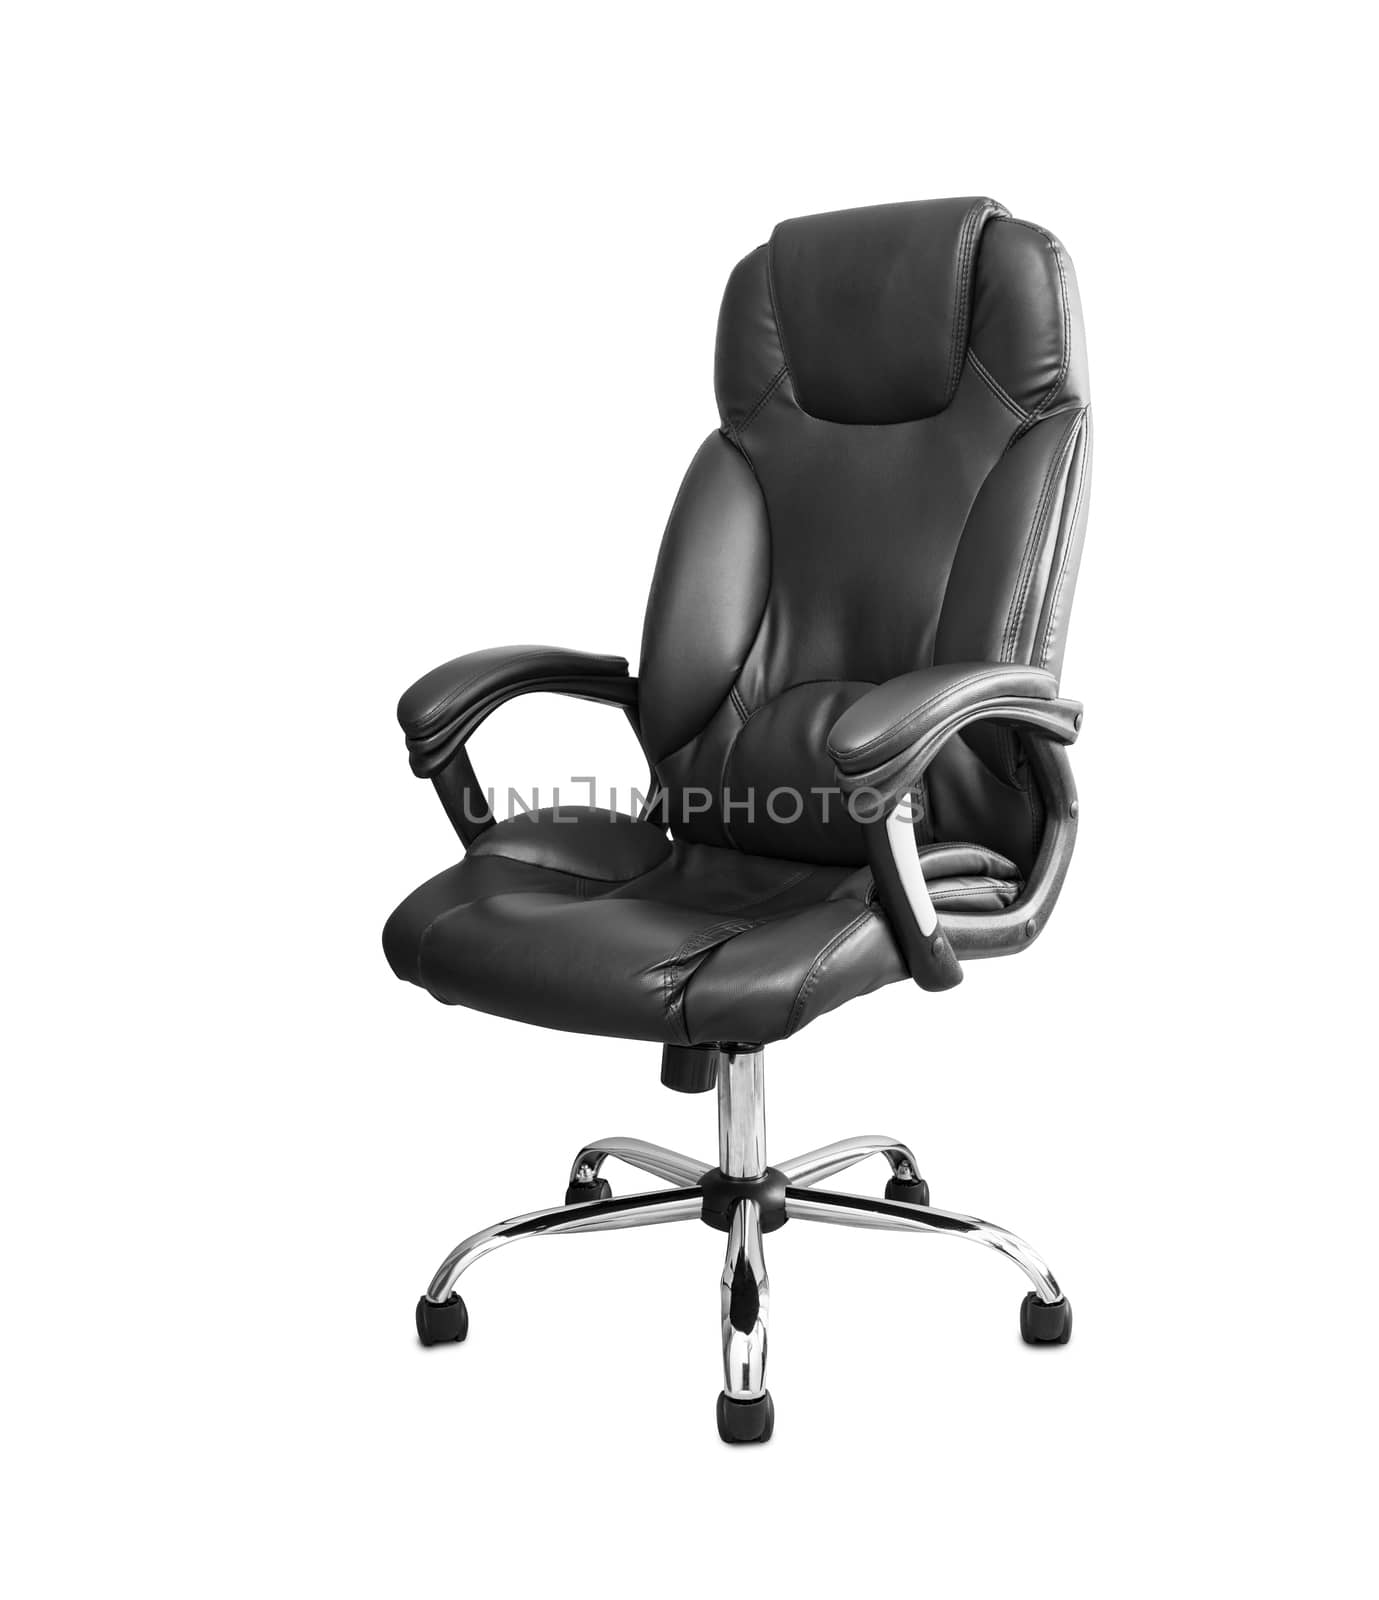 The office chair from black leather. Isolated on white background. With clipping path